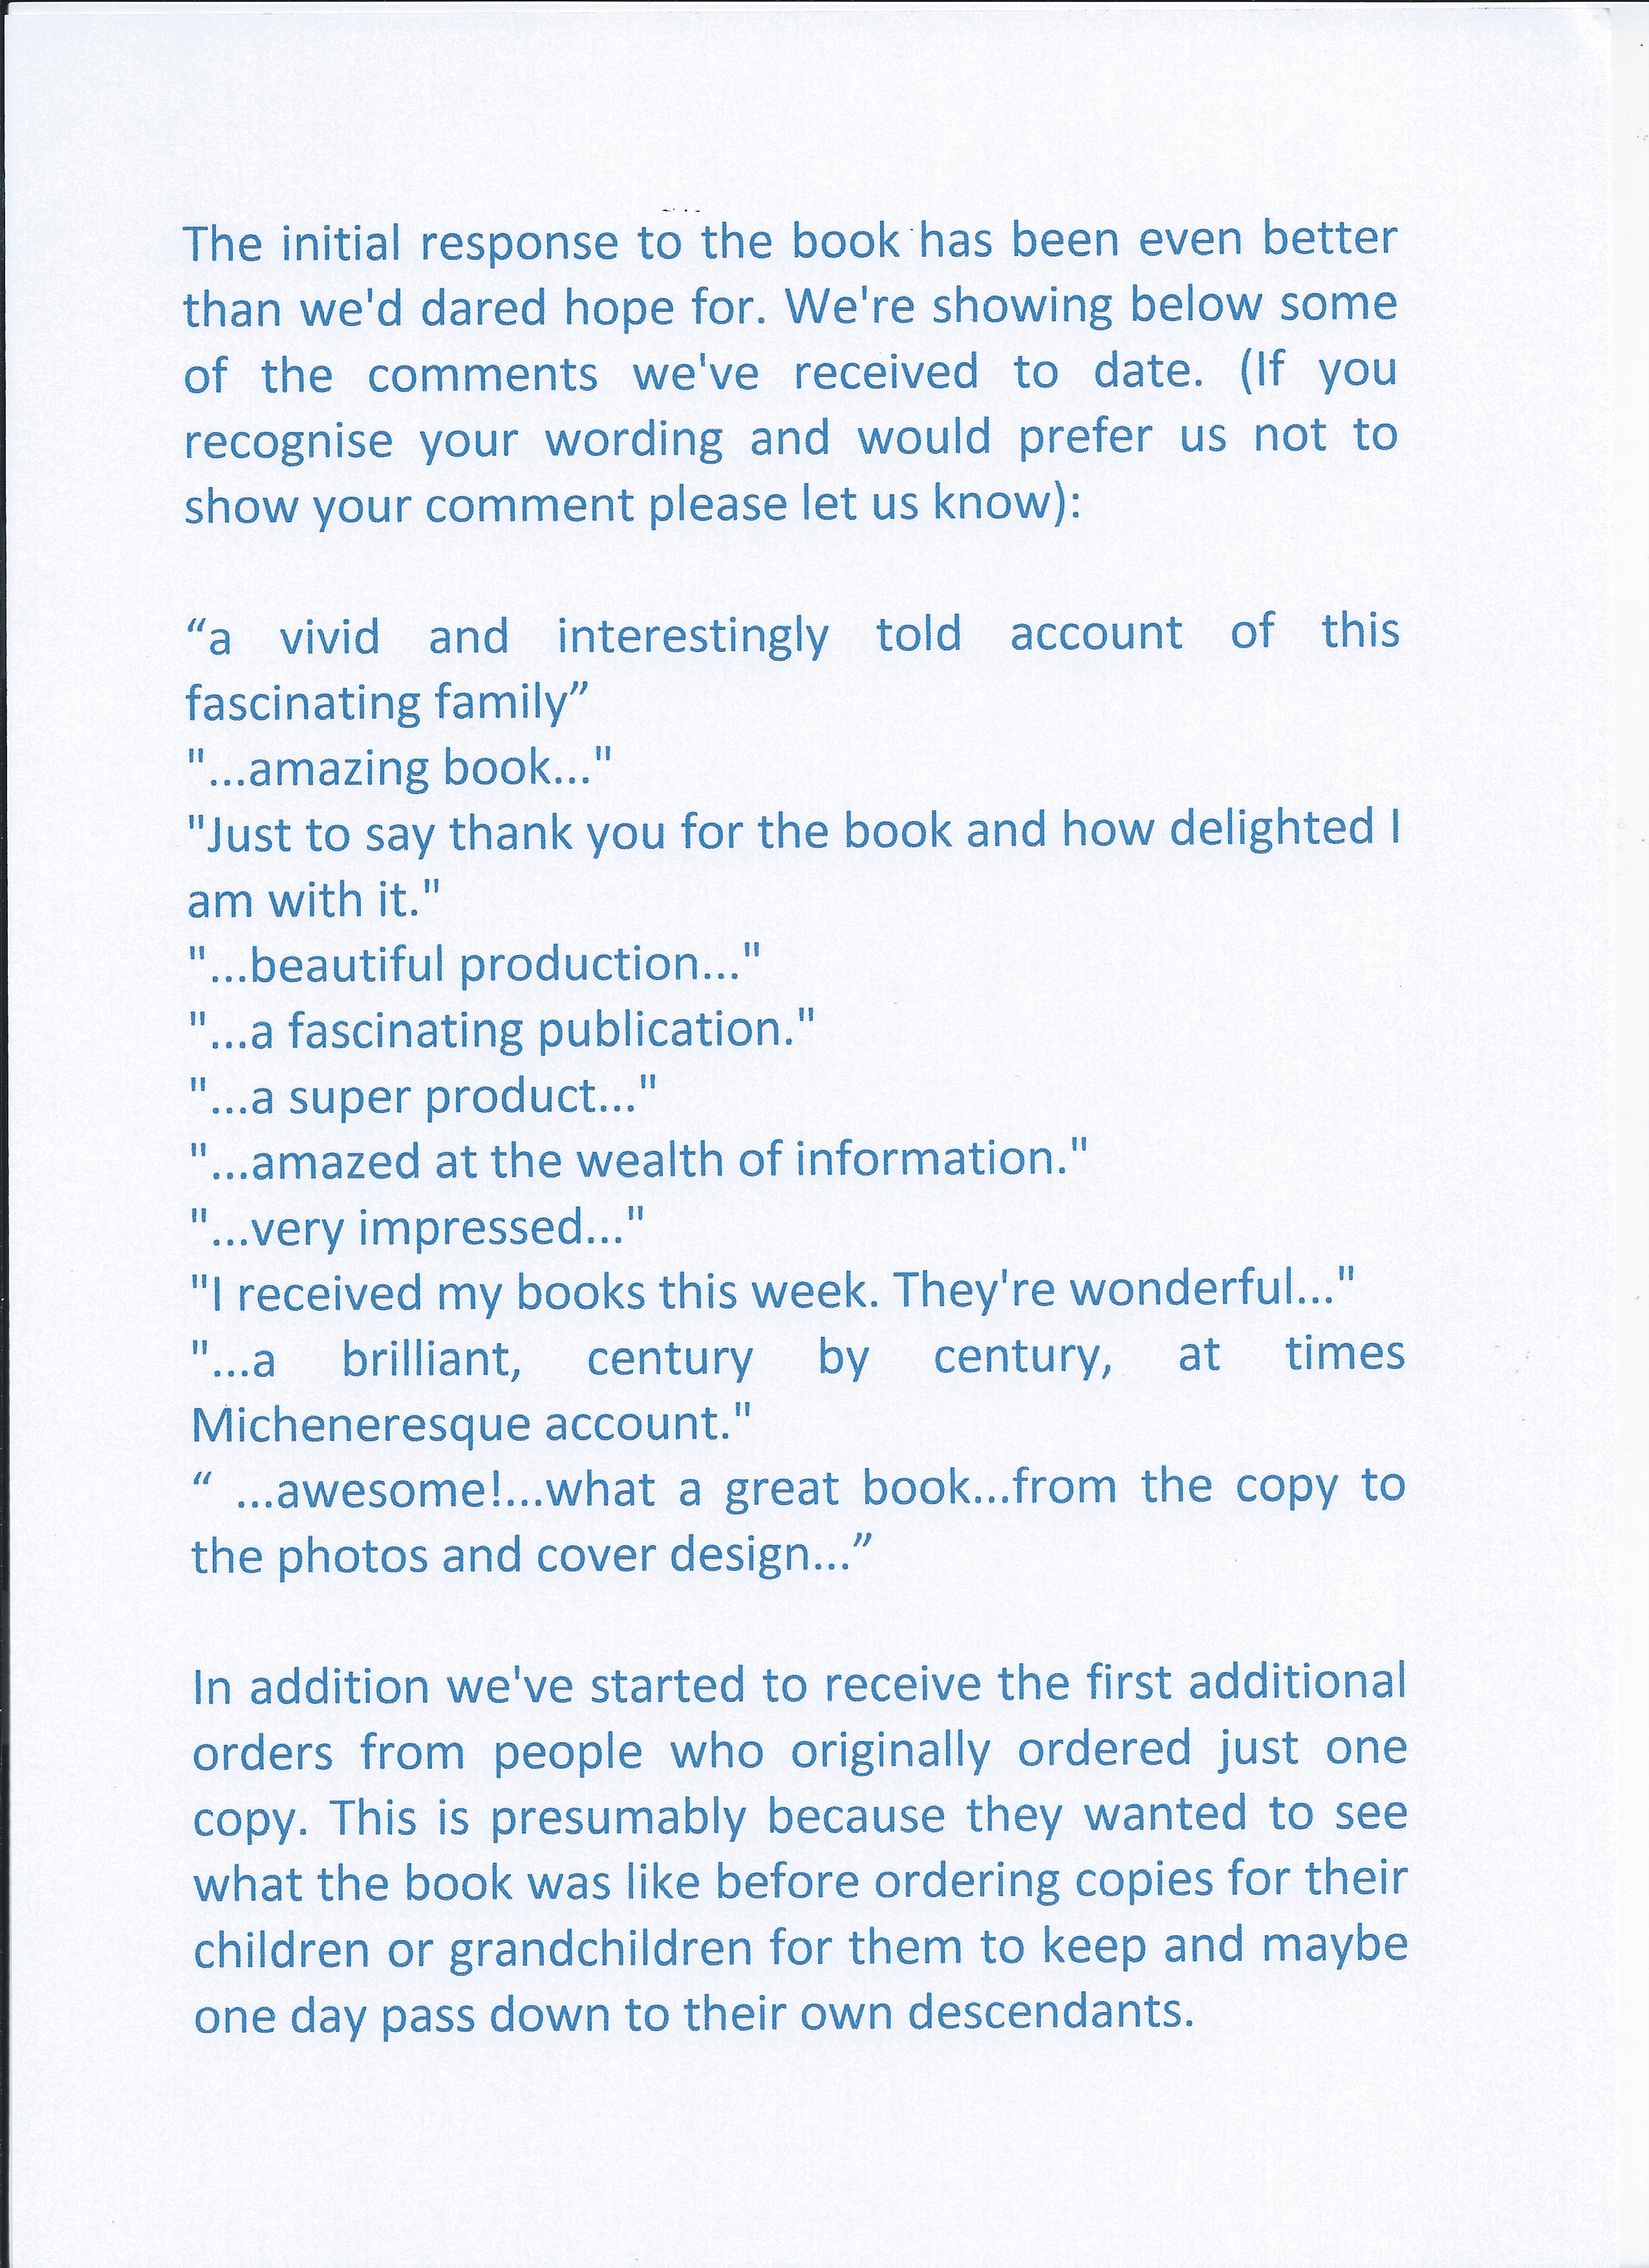 A selection of comments on the book